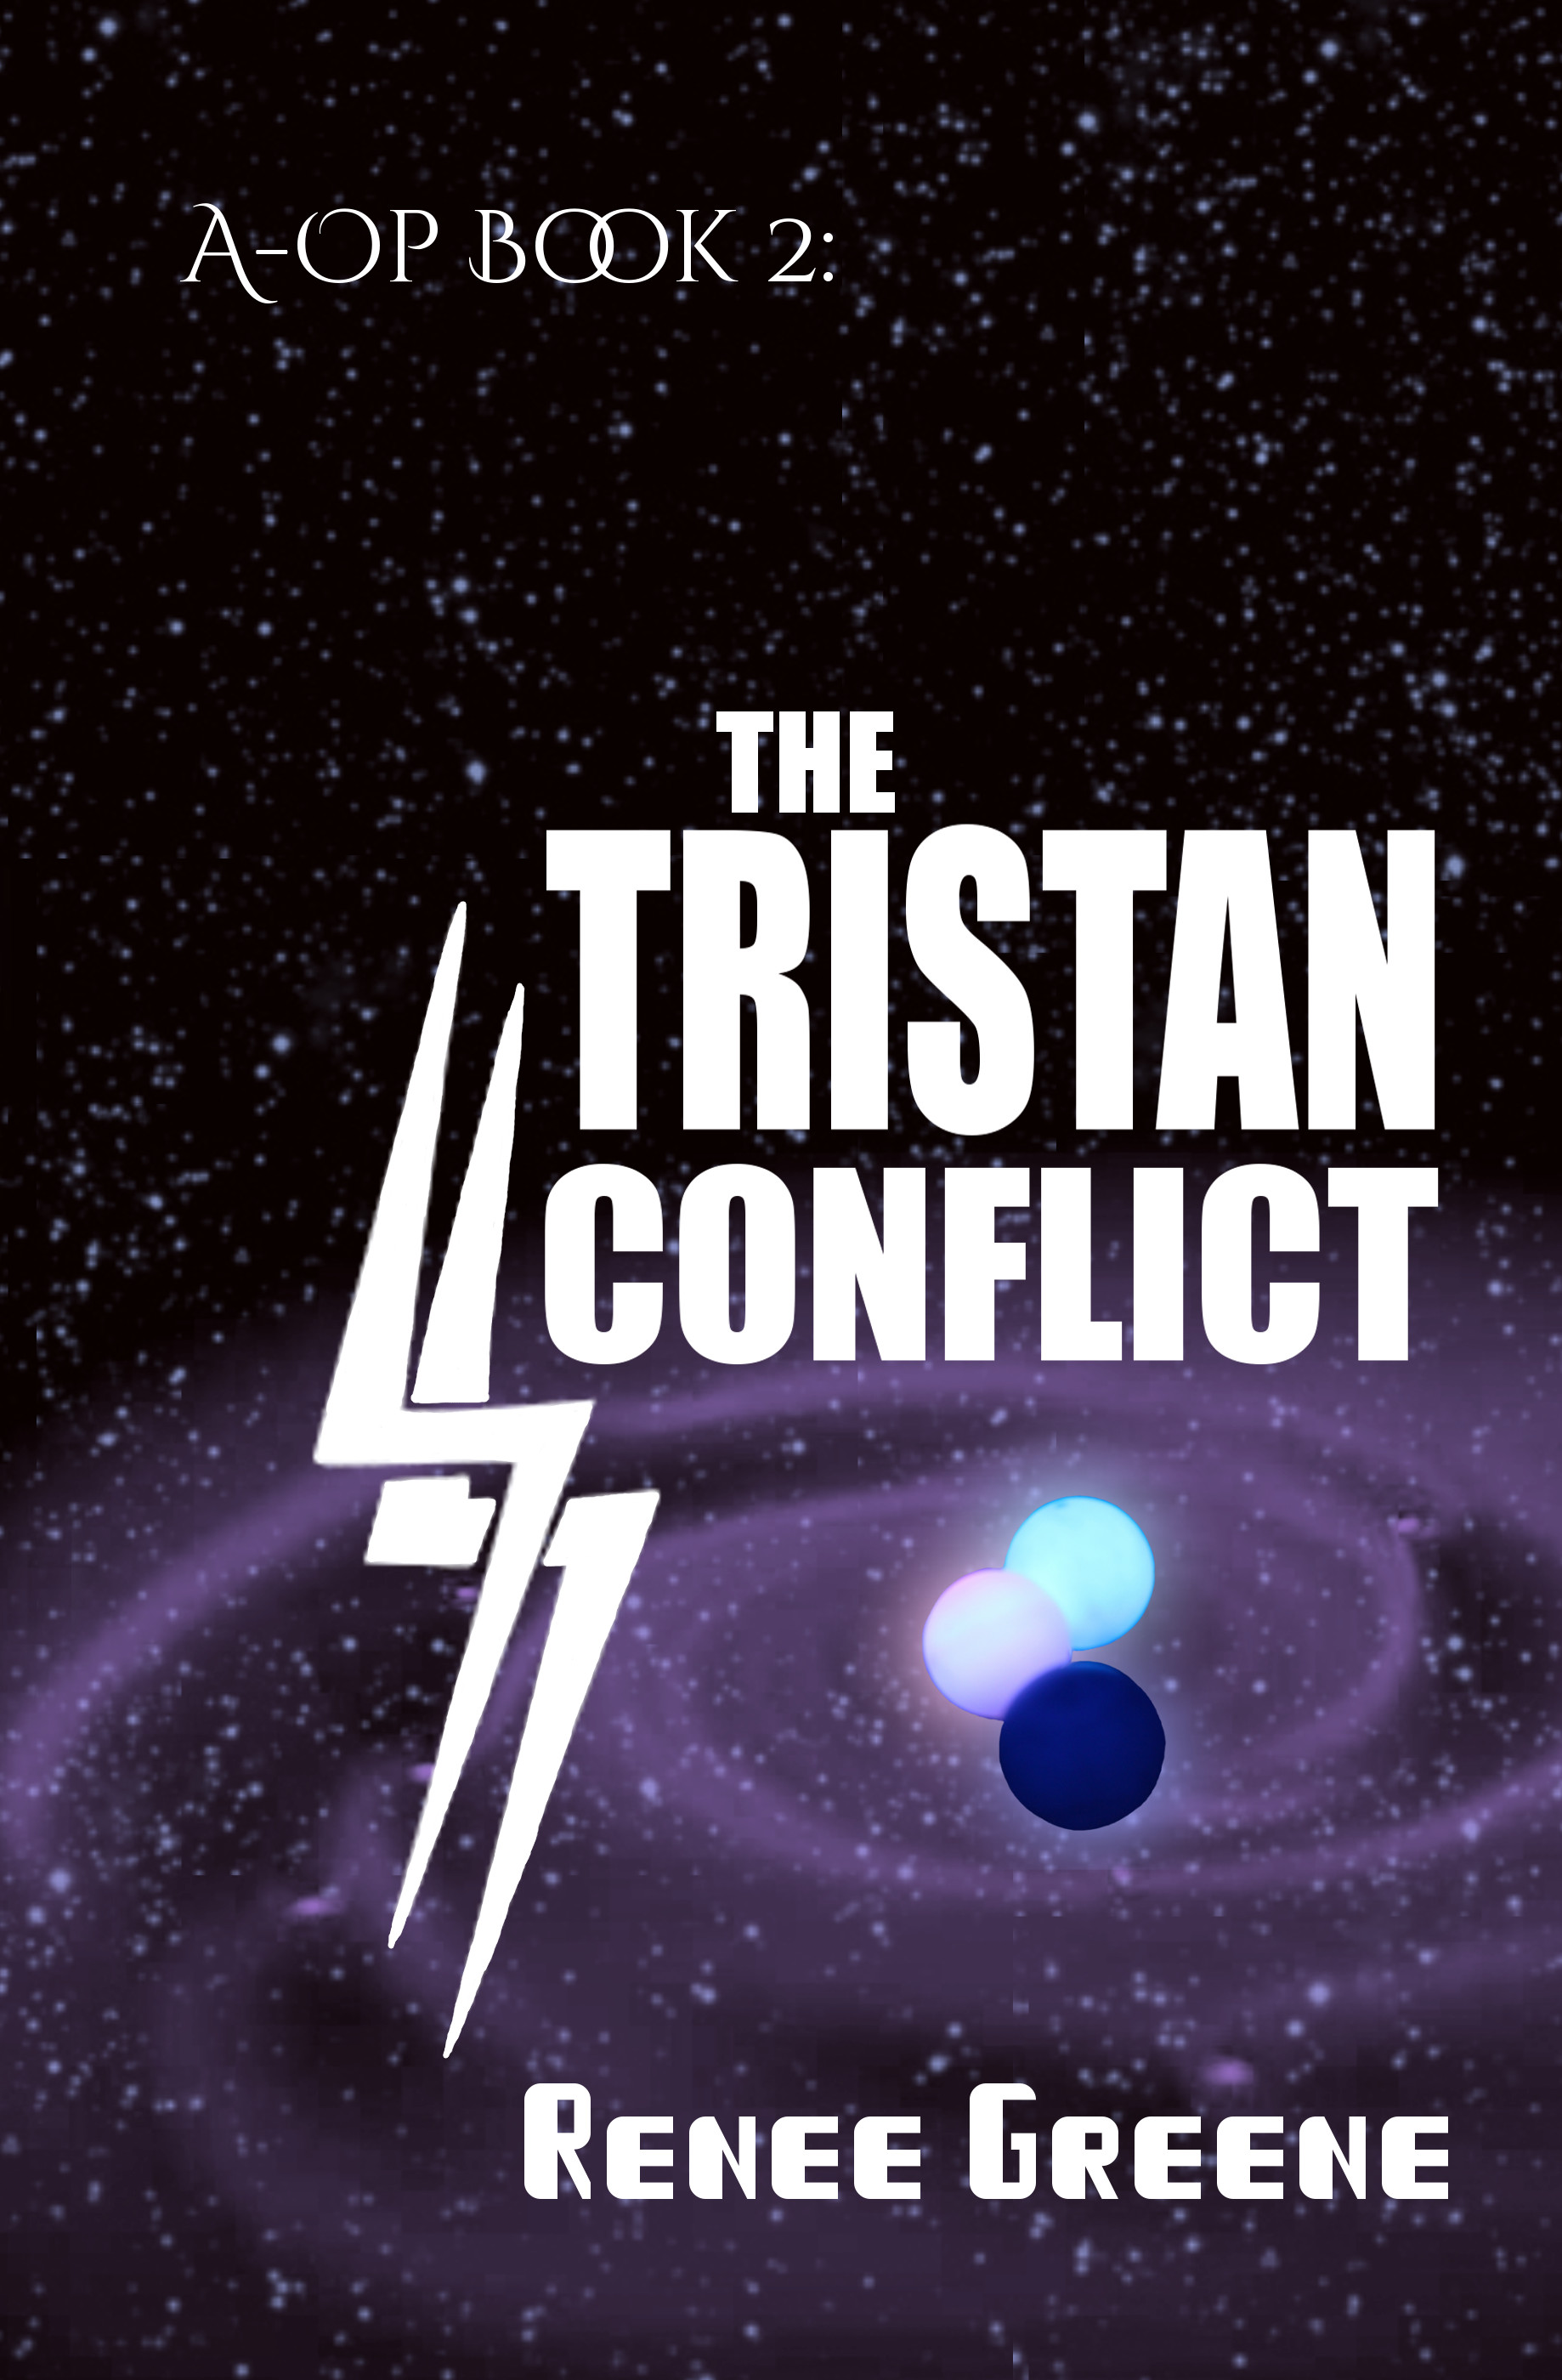 A-OP Book 2: The Tristan Conflict